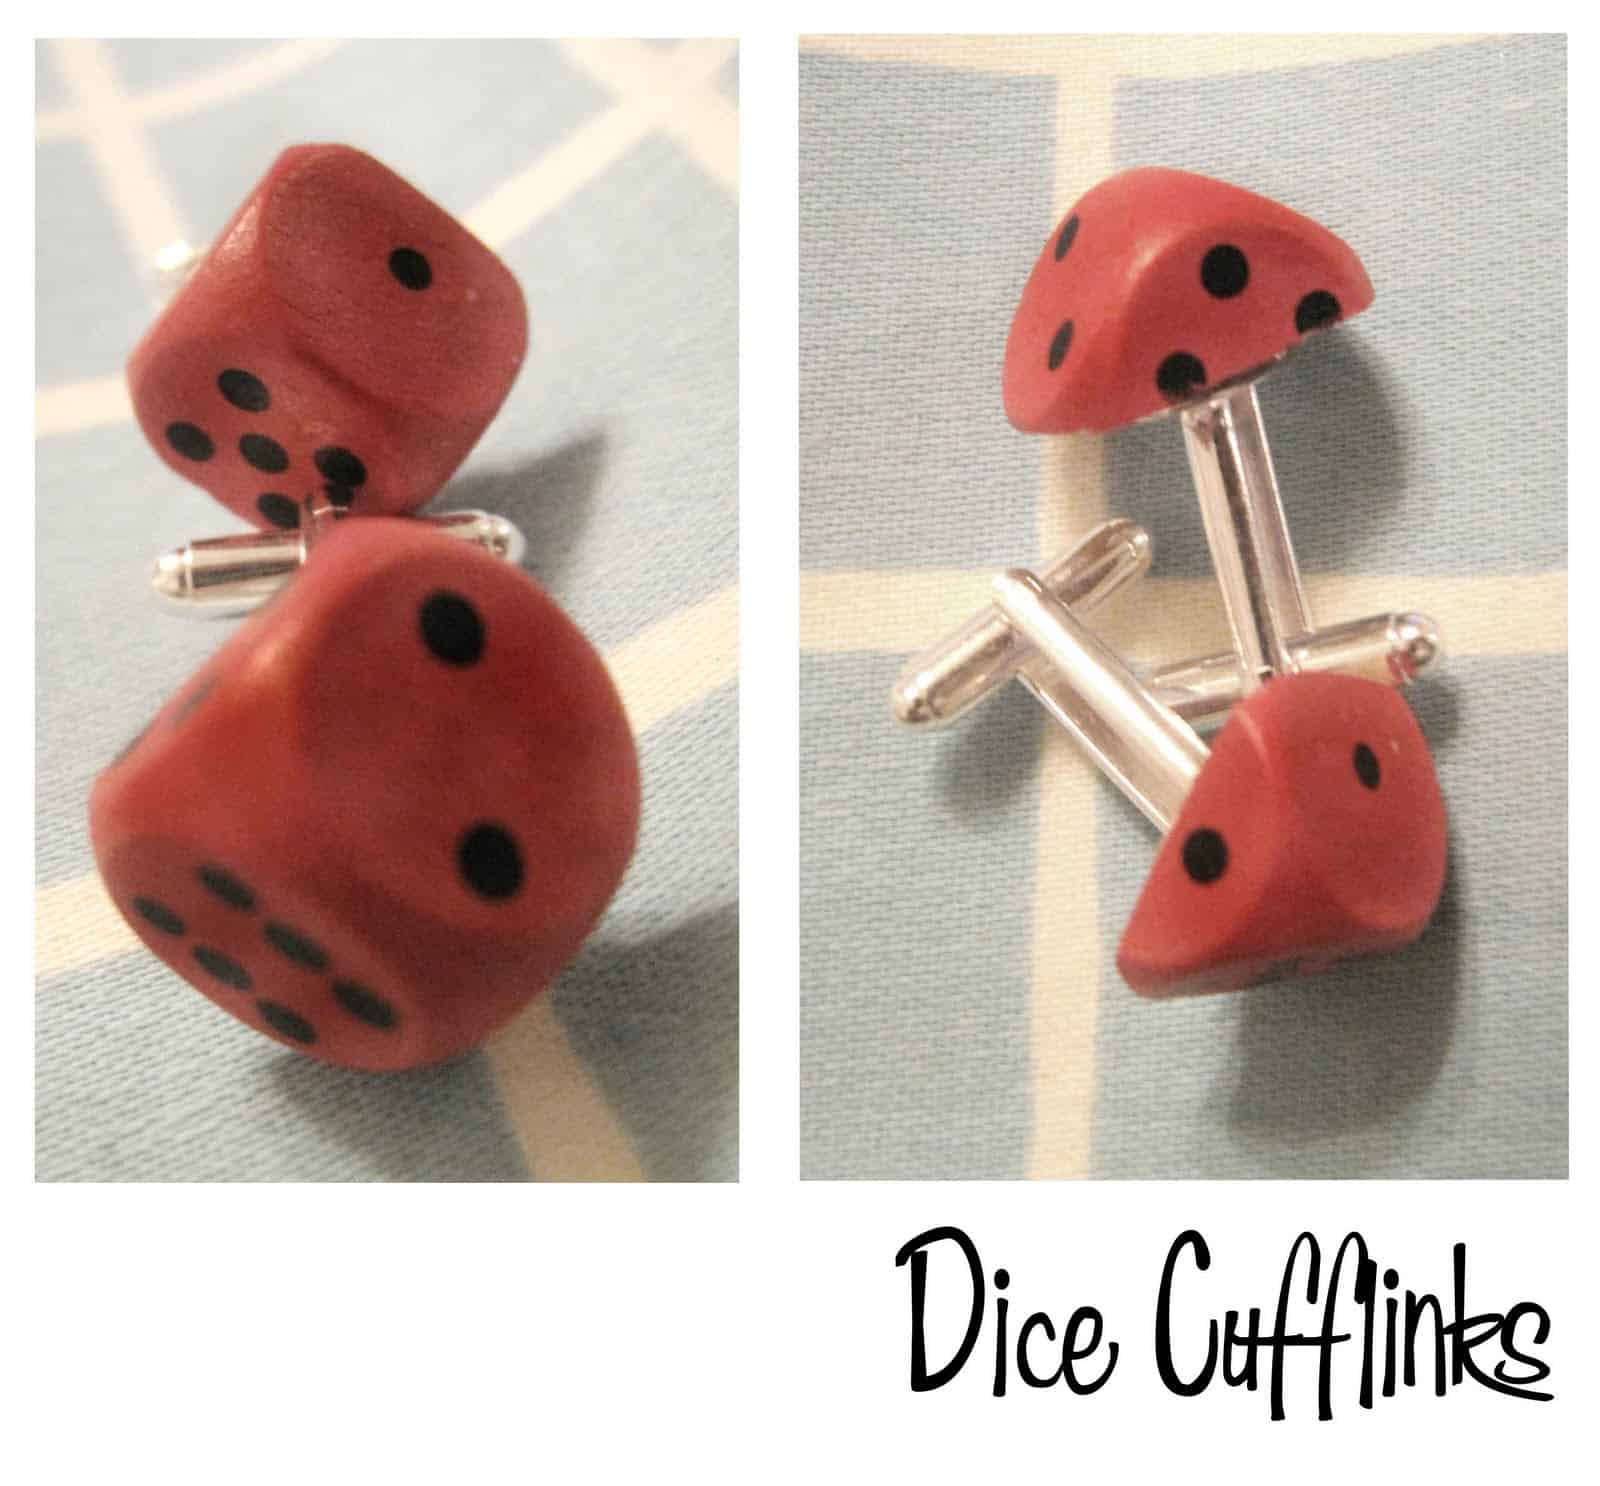 Cufflinks made from dice and watch parts